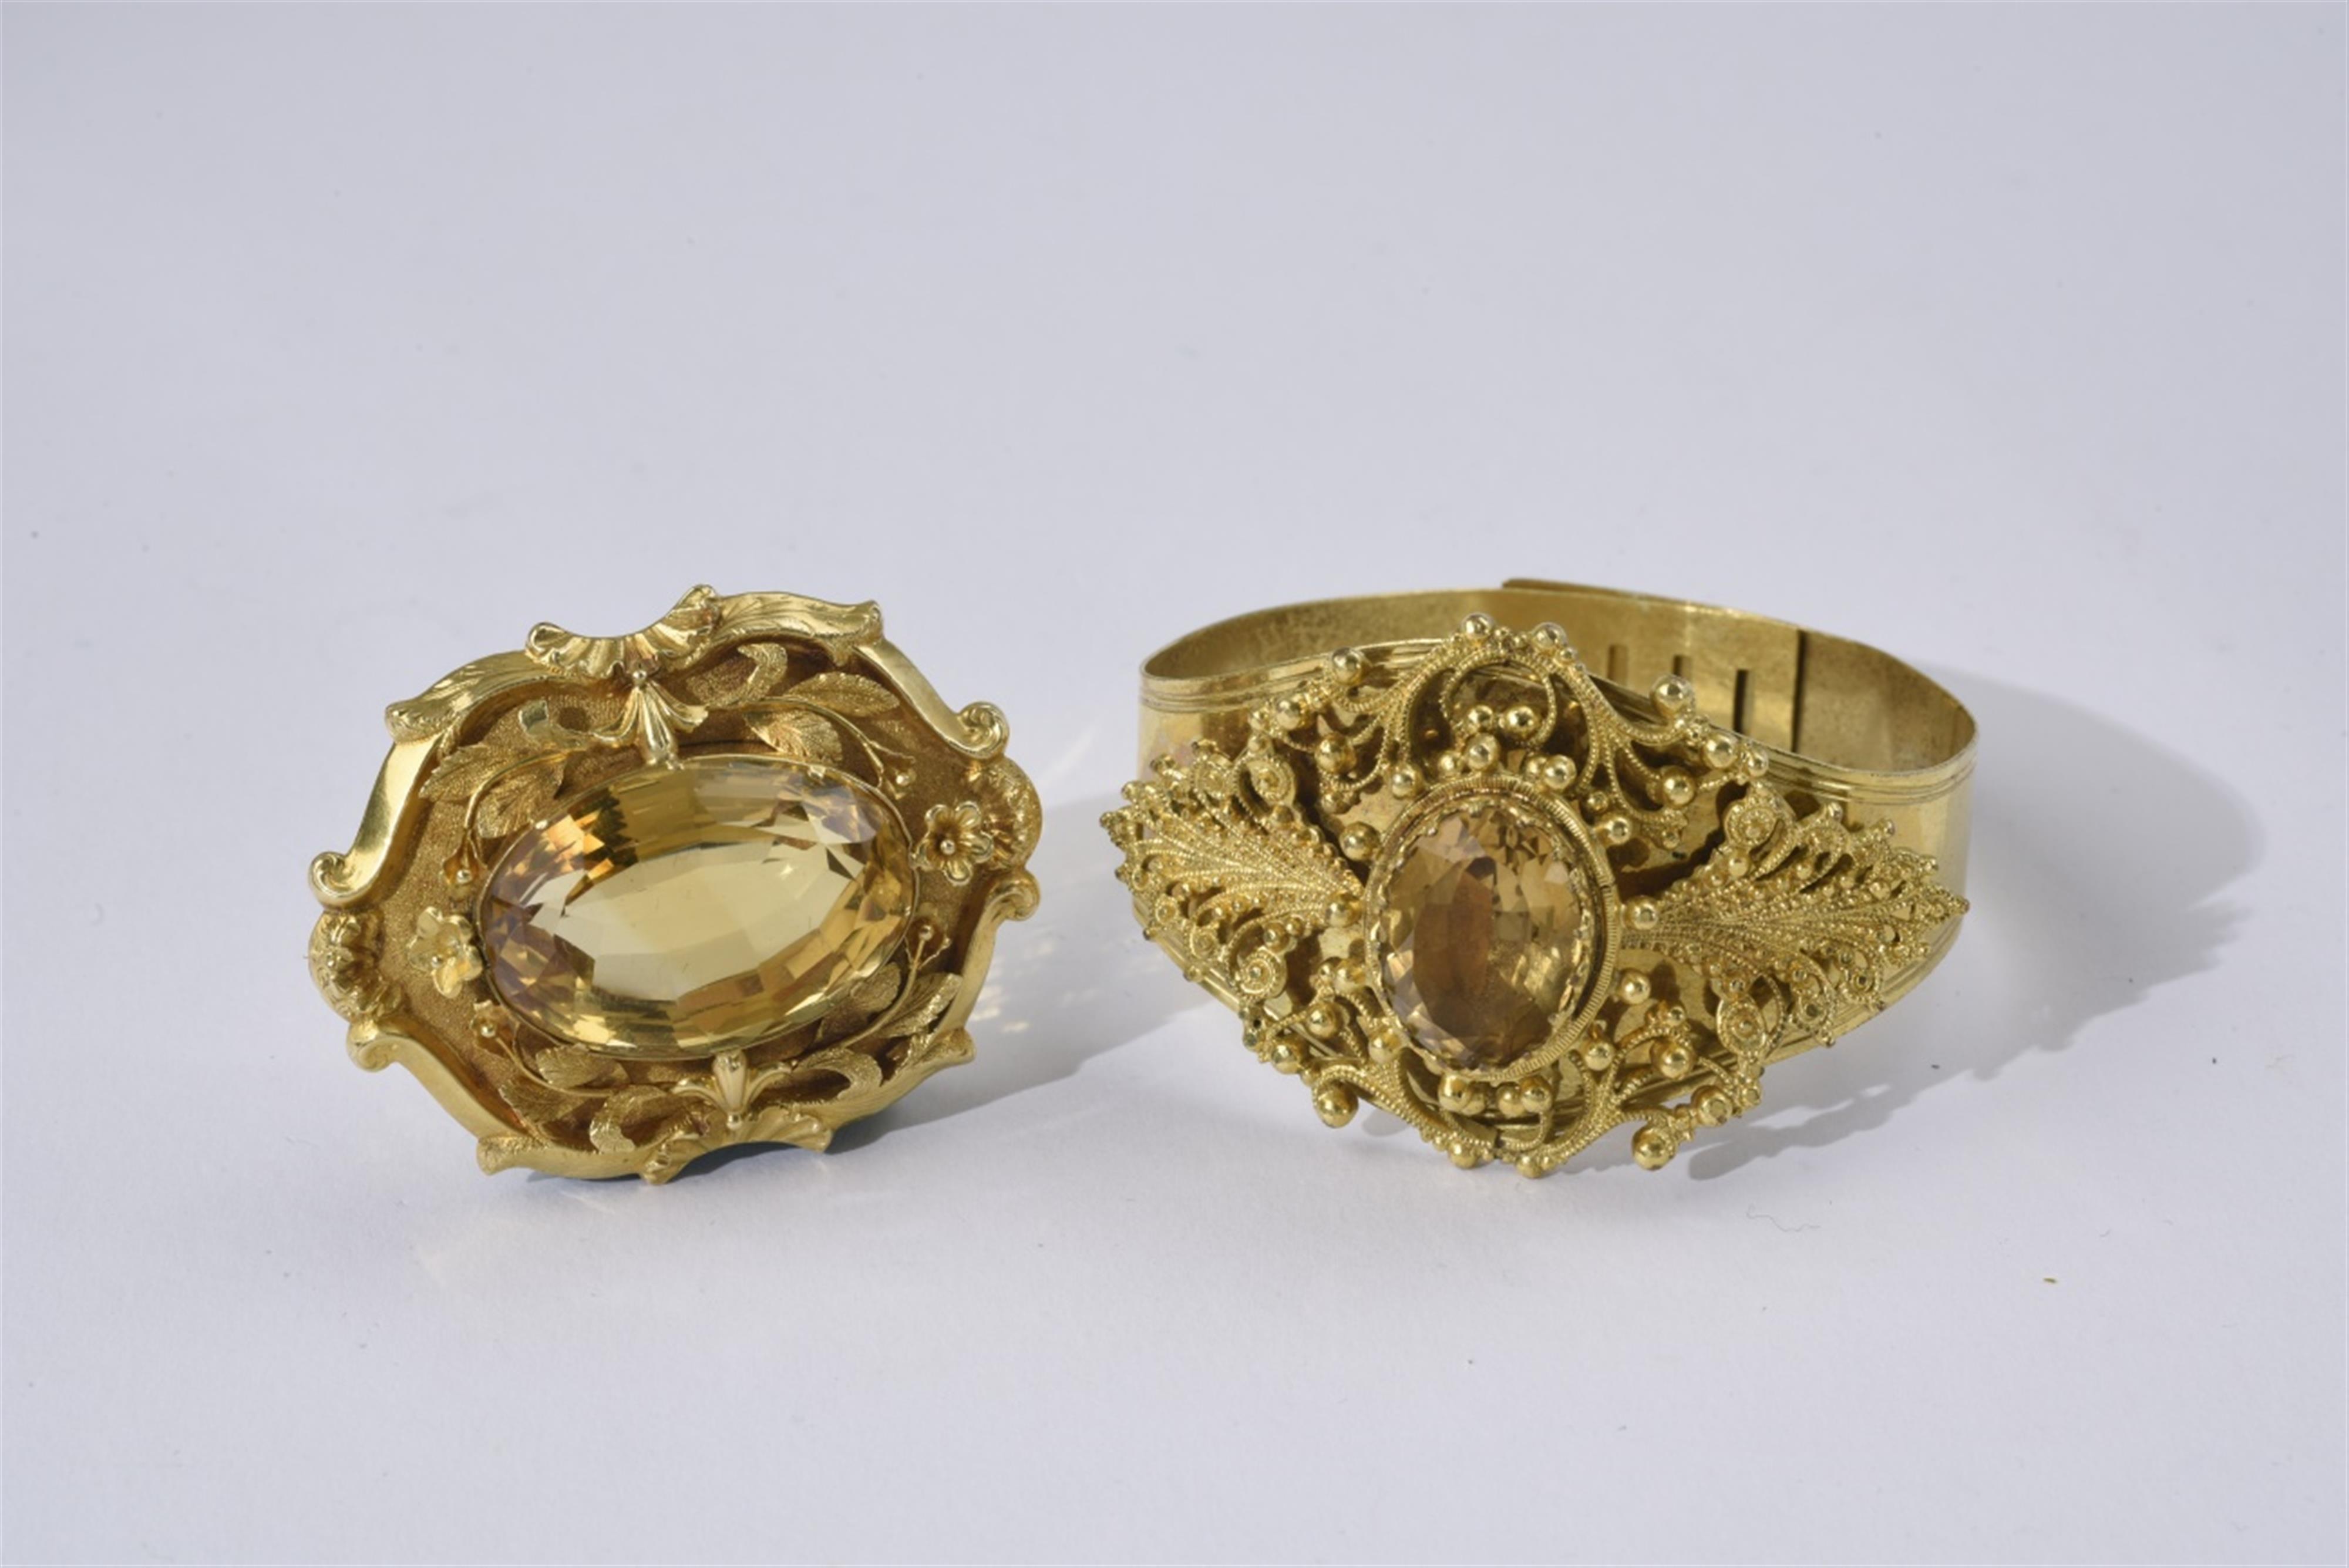 A citrine brooch and bangle - image-1